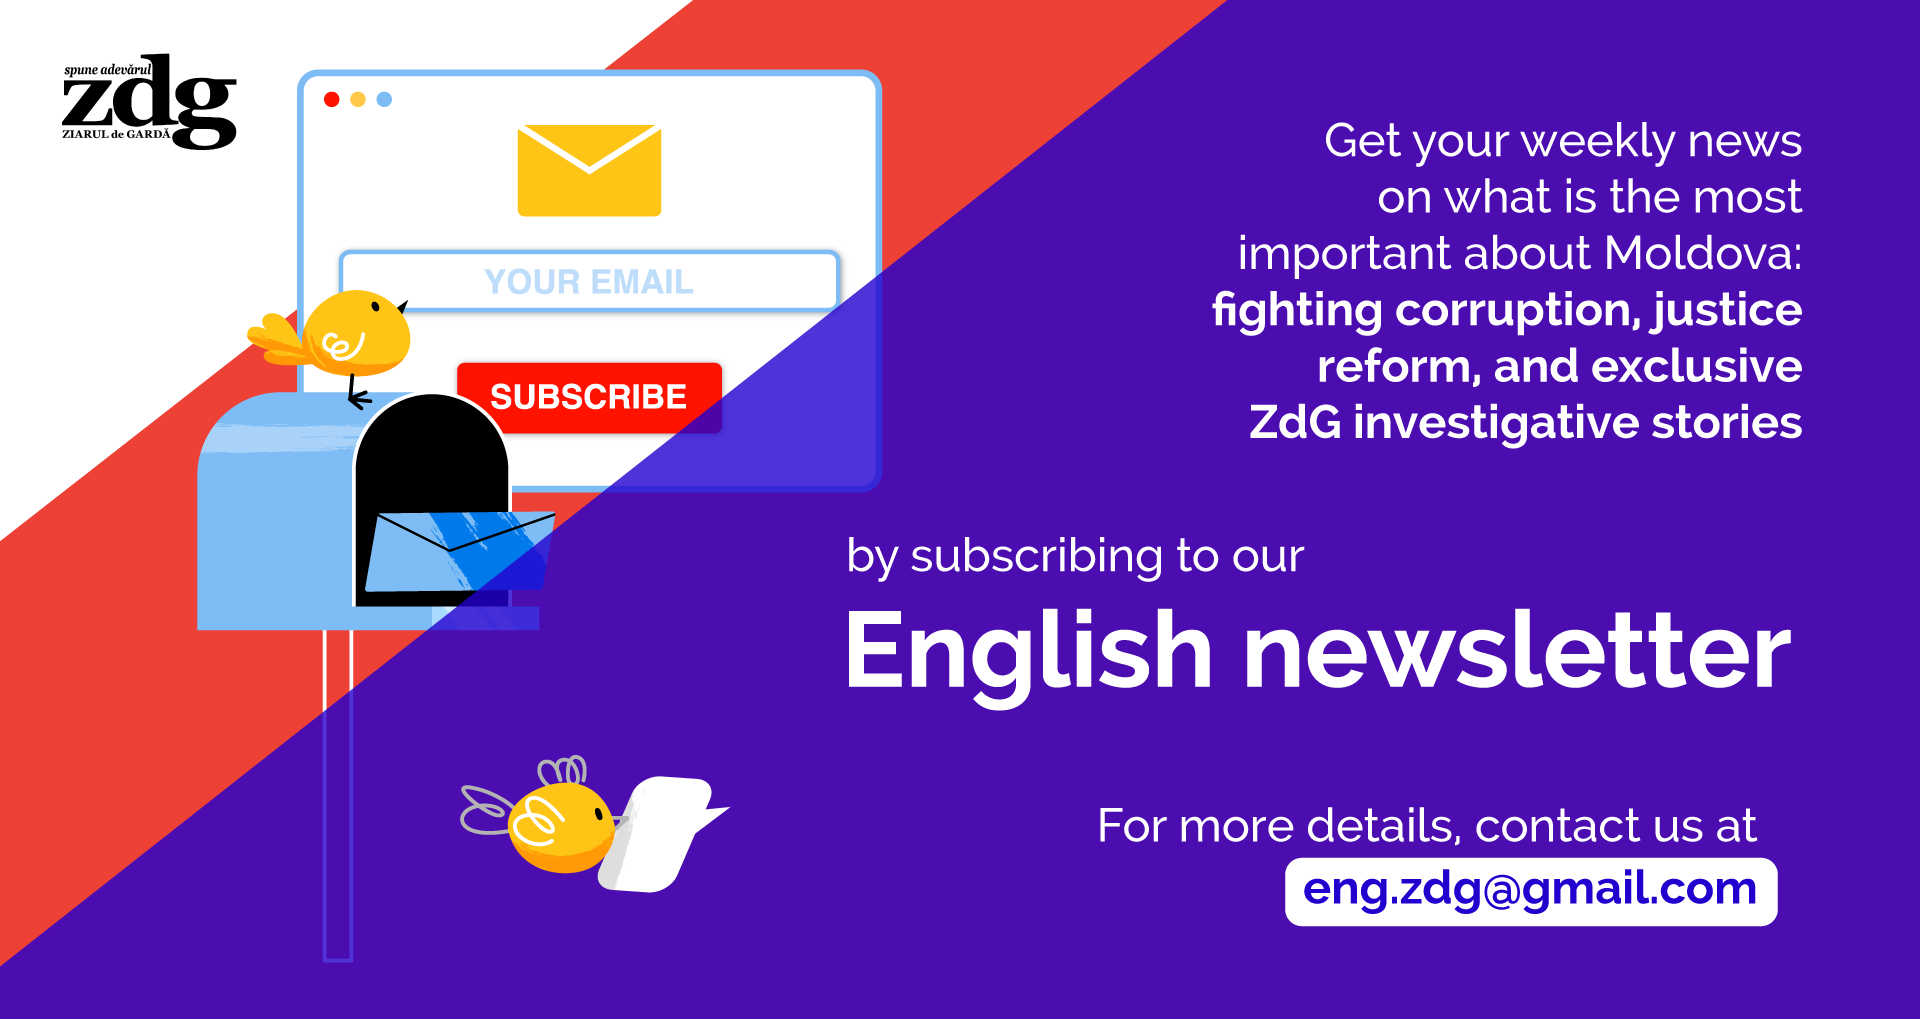 The ZdG English newsletter is back – sign up now!